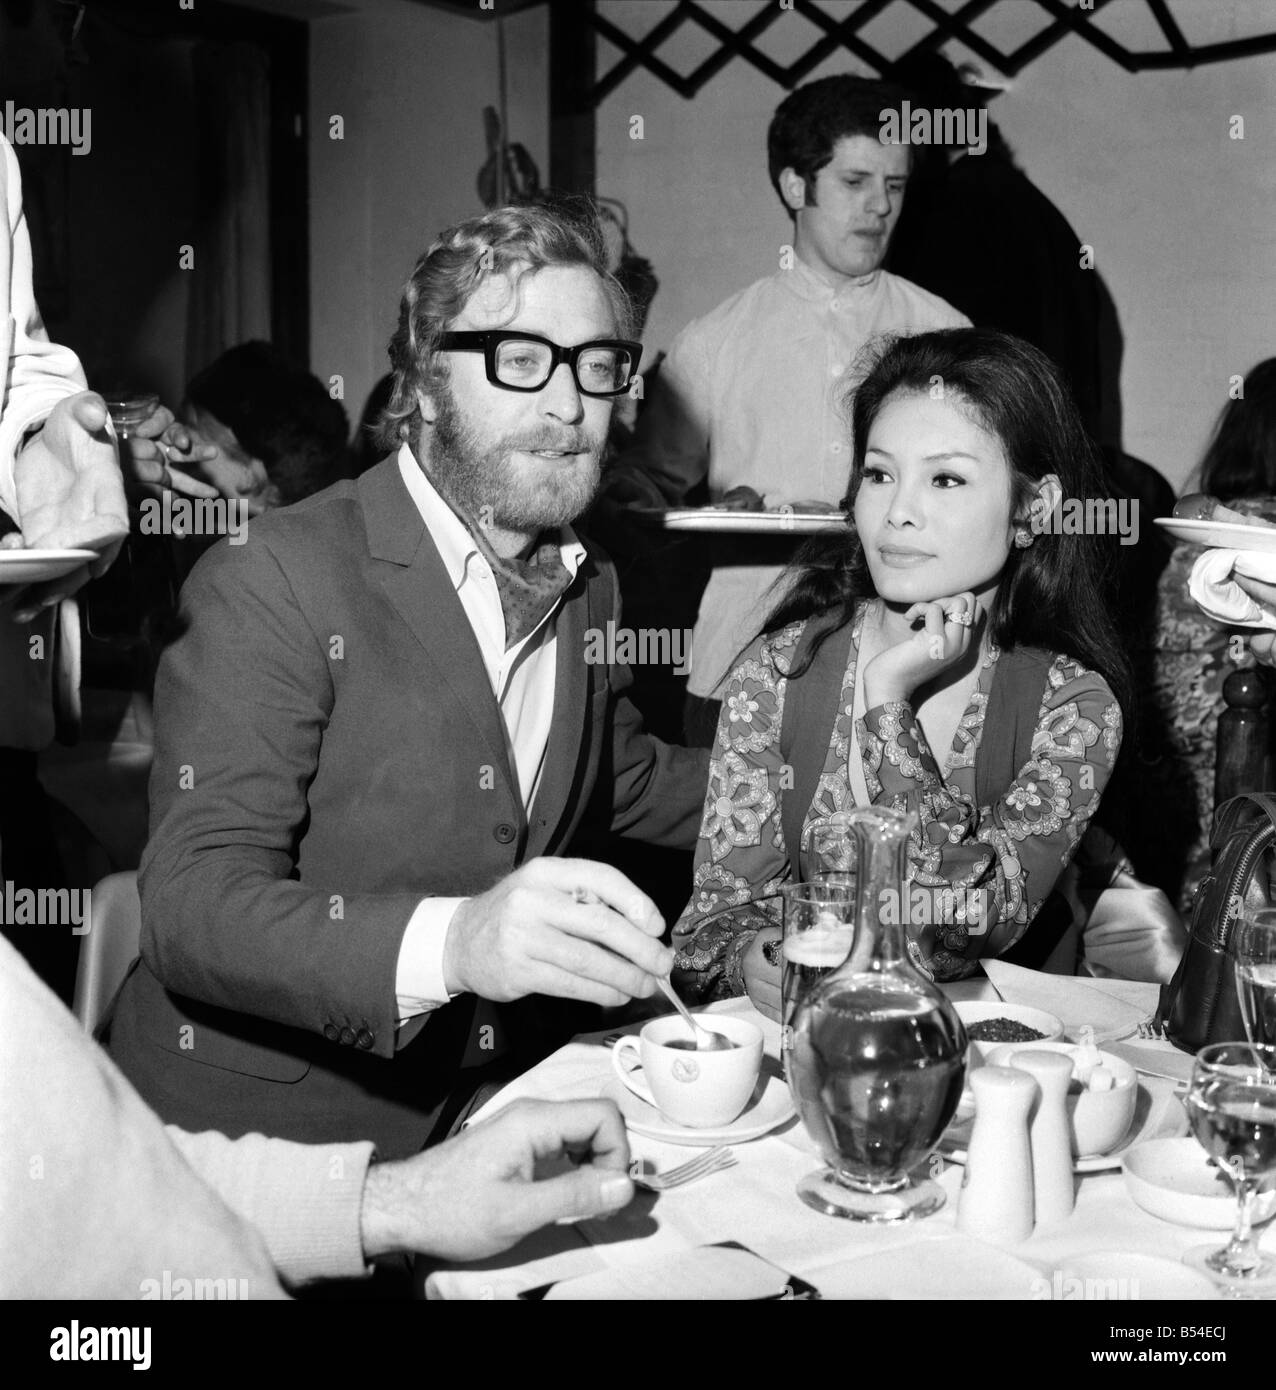 Photographer david Bailey today held a party in a Kings Road chelsea club to launch his book attended the party. Michael Caine with his girl friend Minda Feliciano. November 1969 Z10810-002 Stock Photo